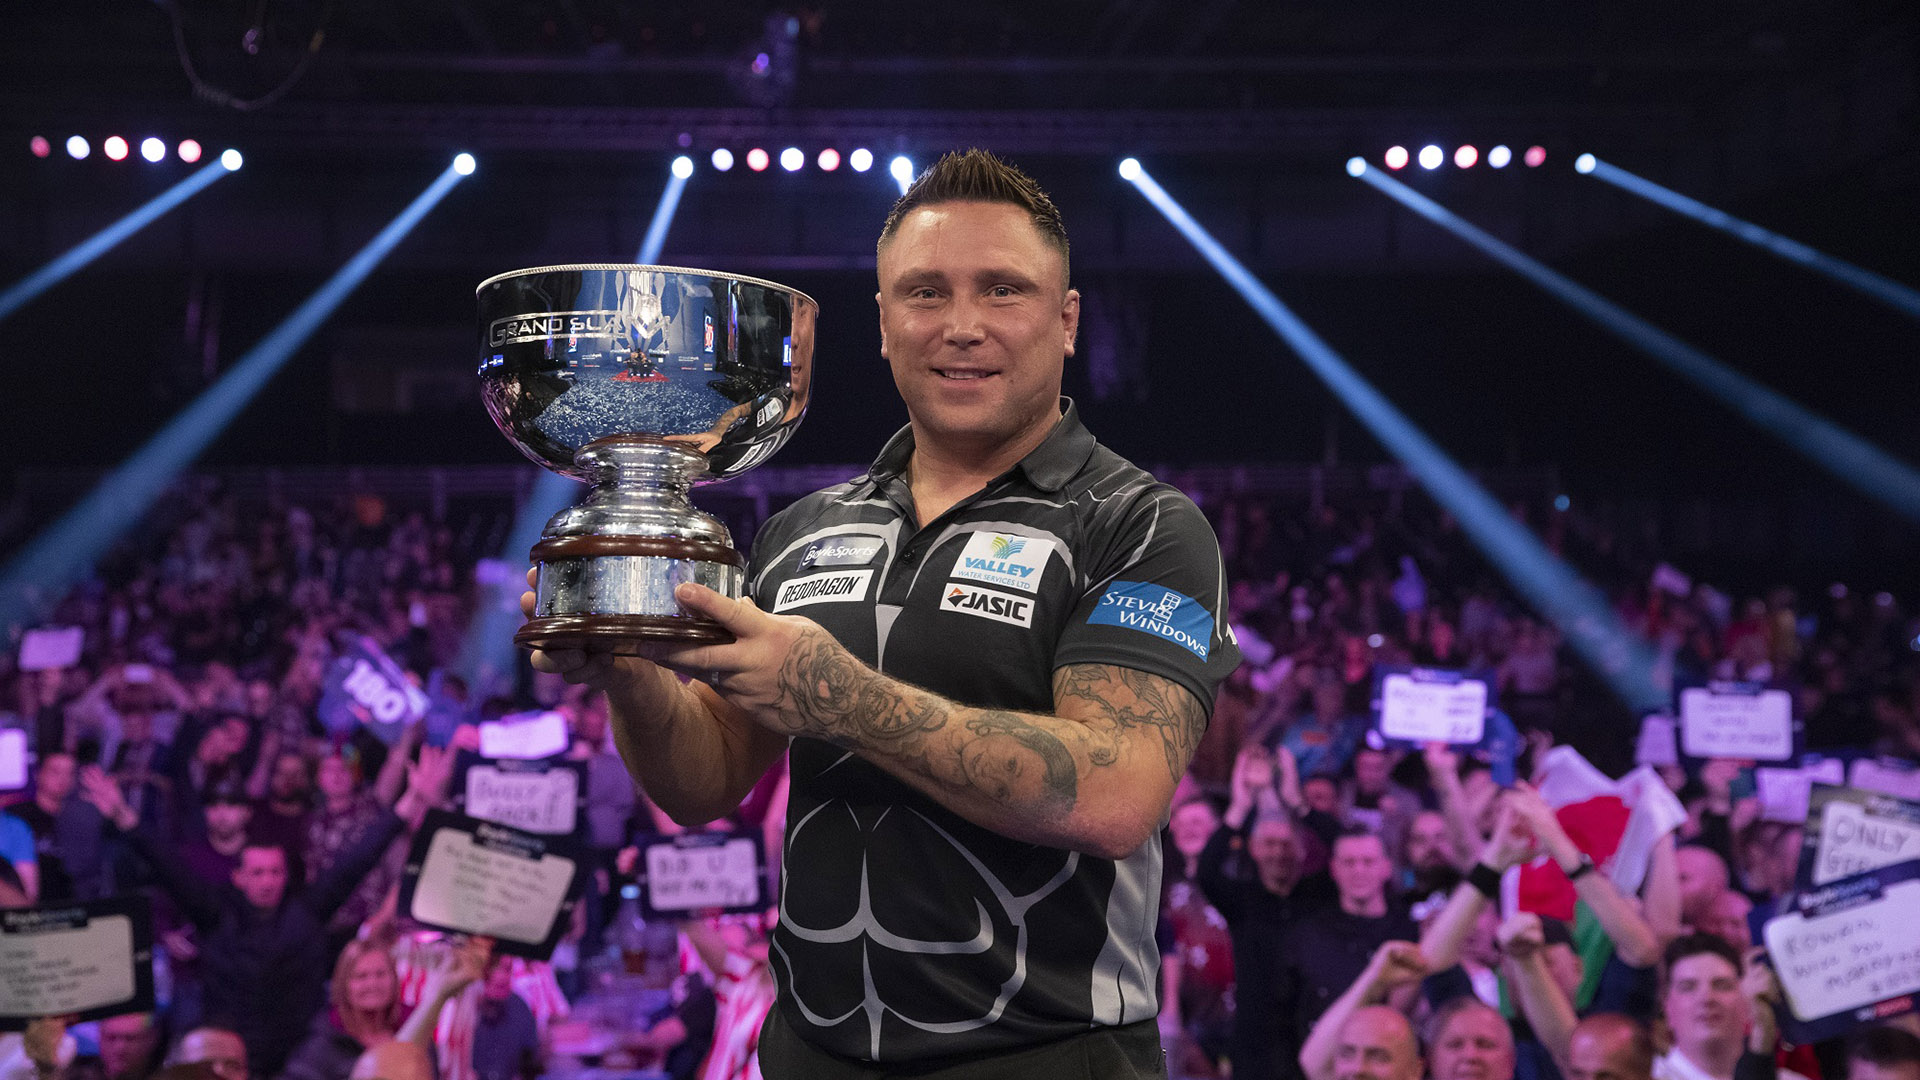 Grand Slam of Darts 2019: Group draw, line-up, betting odds, results & Sports coverage details